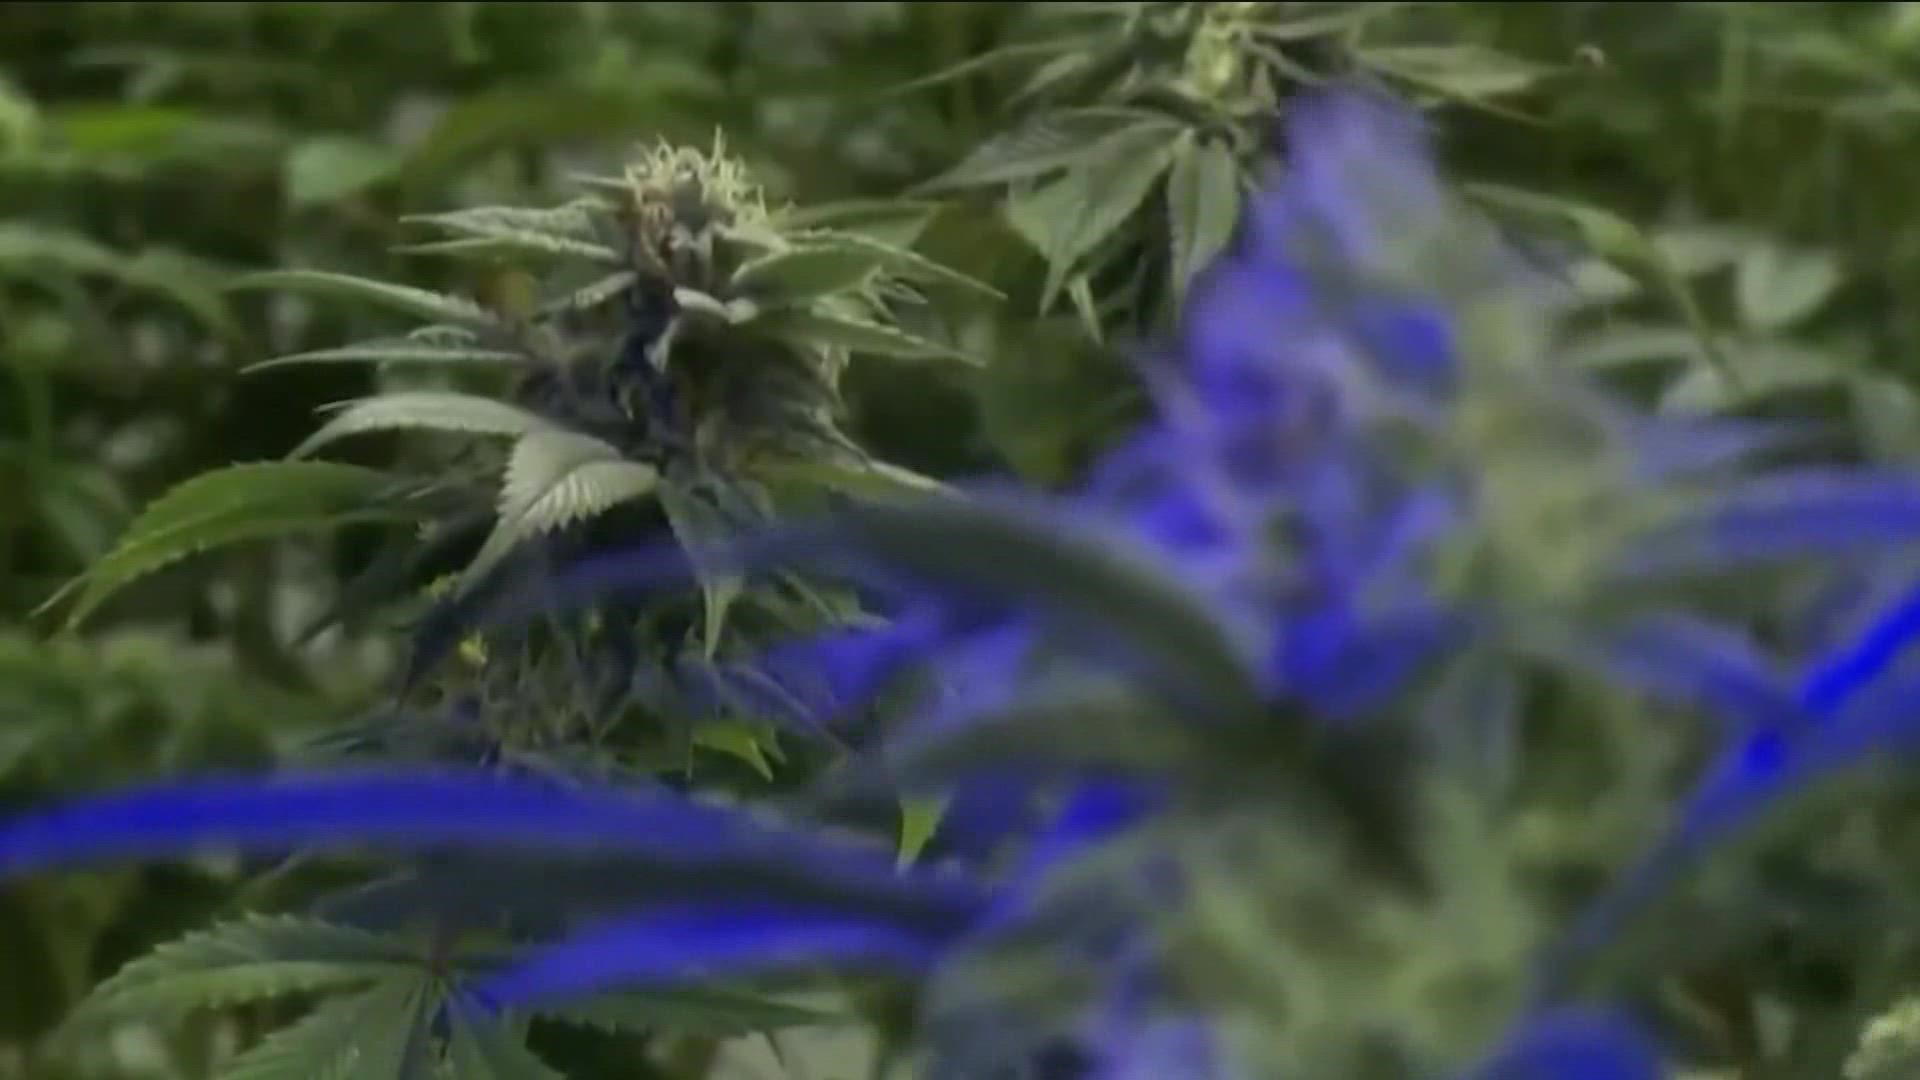 San Marcos and Elgin residents voted to decriminalize marijuana within city limits.